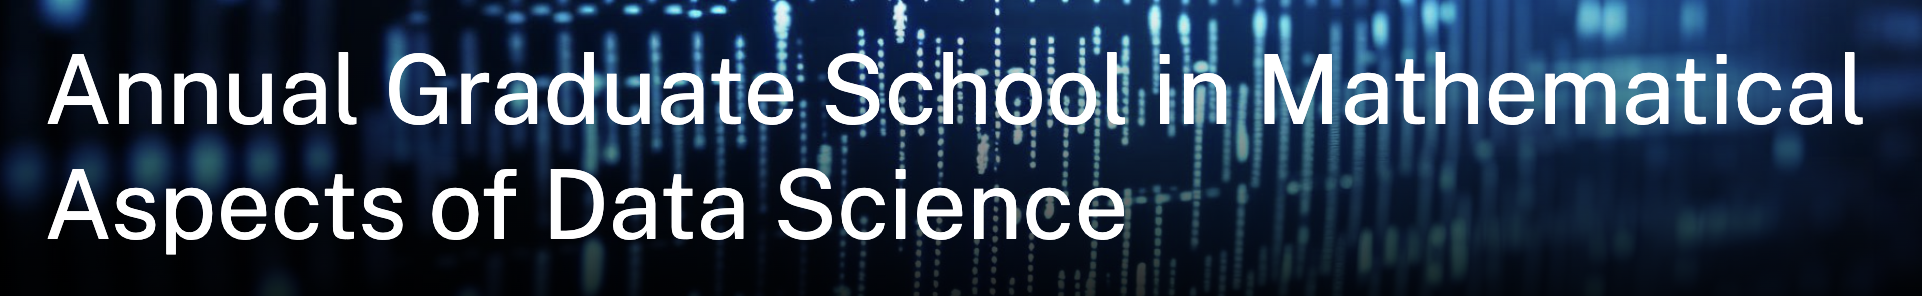 Annual Graduate School in Mathematical Aspects of Data Science